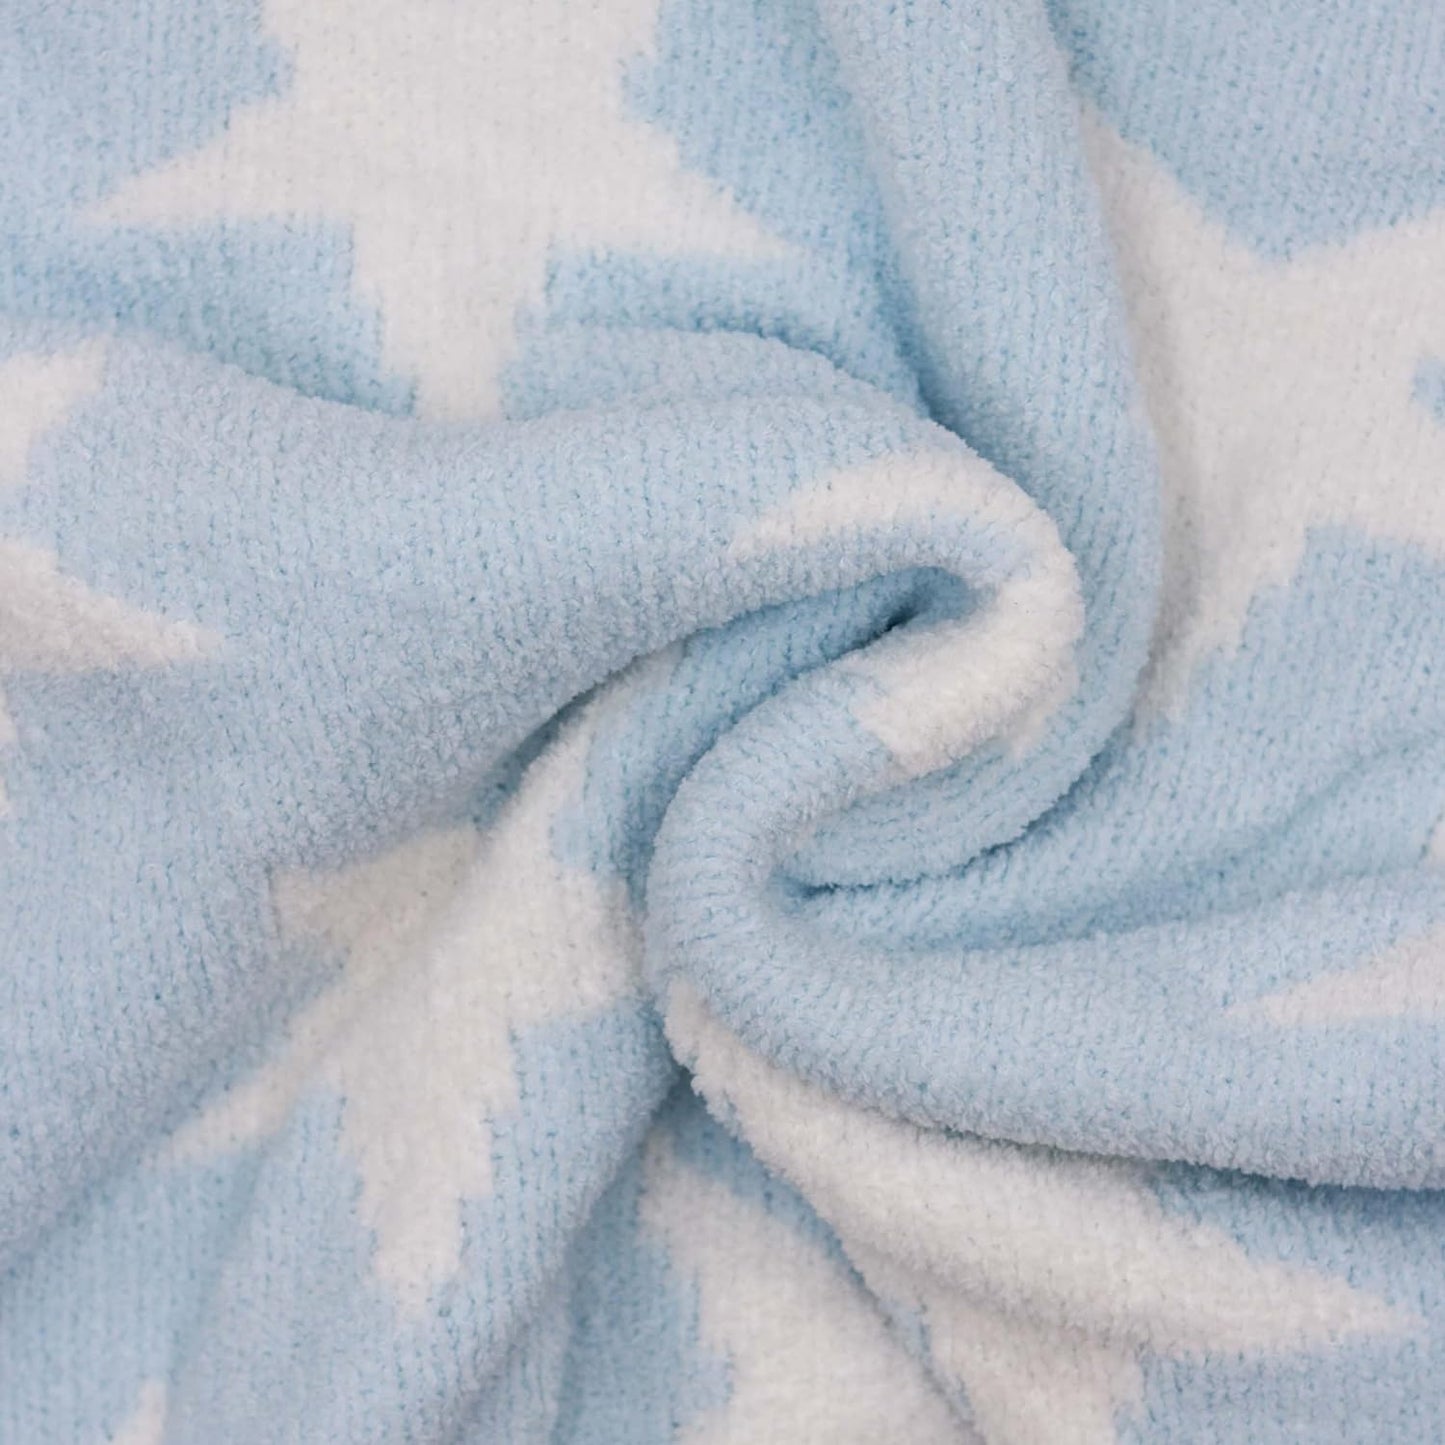 LITTLE CELEBRITY Chenille Baby Blanket, Baby Blankets for Boys, Baby Blankets for Girls, Toddler Blanket, Baby Boy & Girl Blankets, Soft Baby Blankets, Plush Baby Blankets, 40x30 Inches (Grey Clouds)